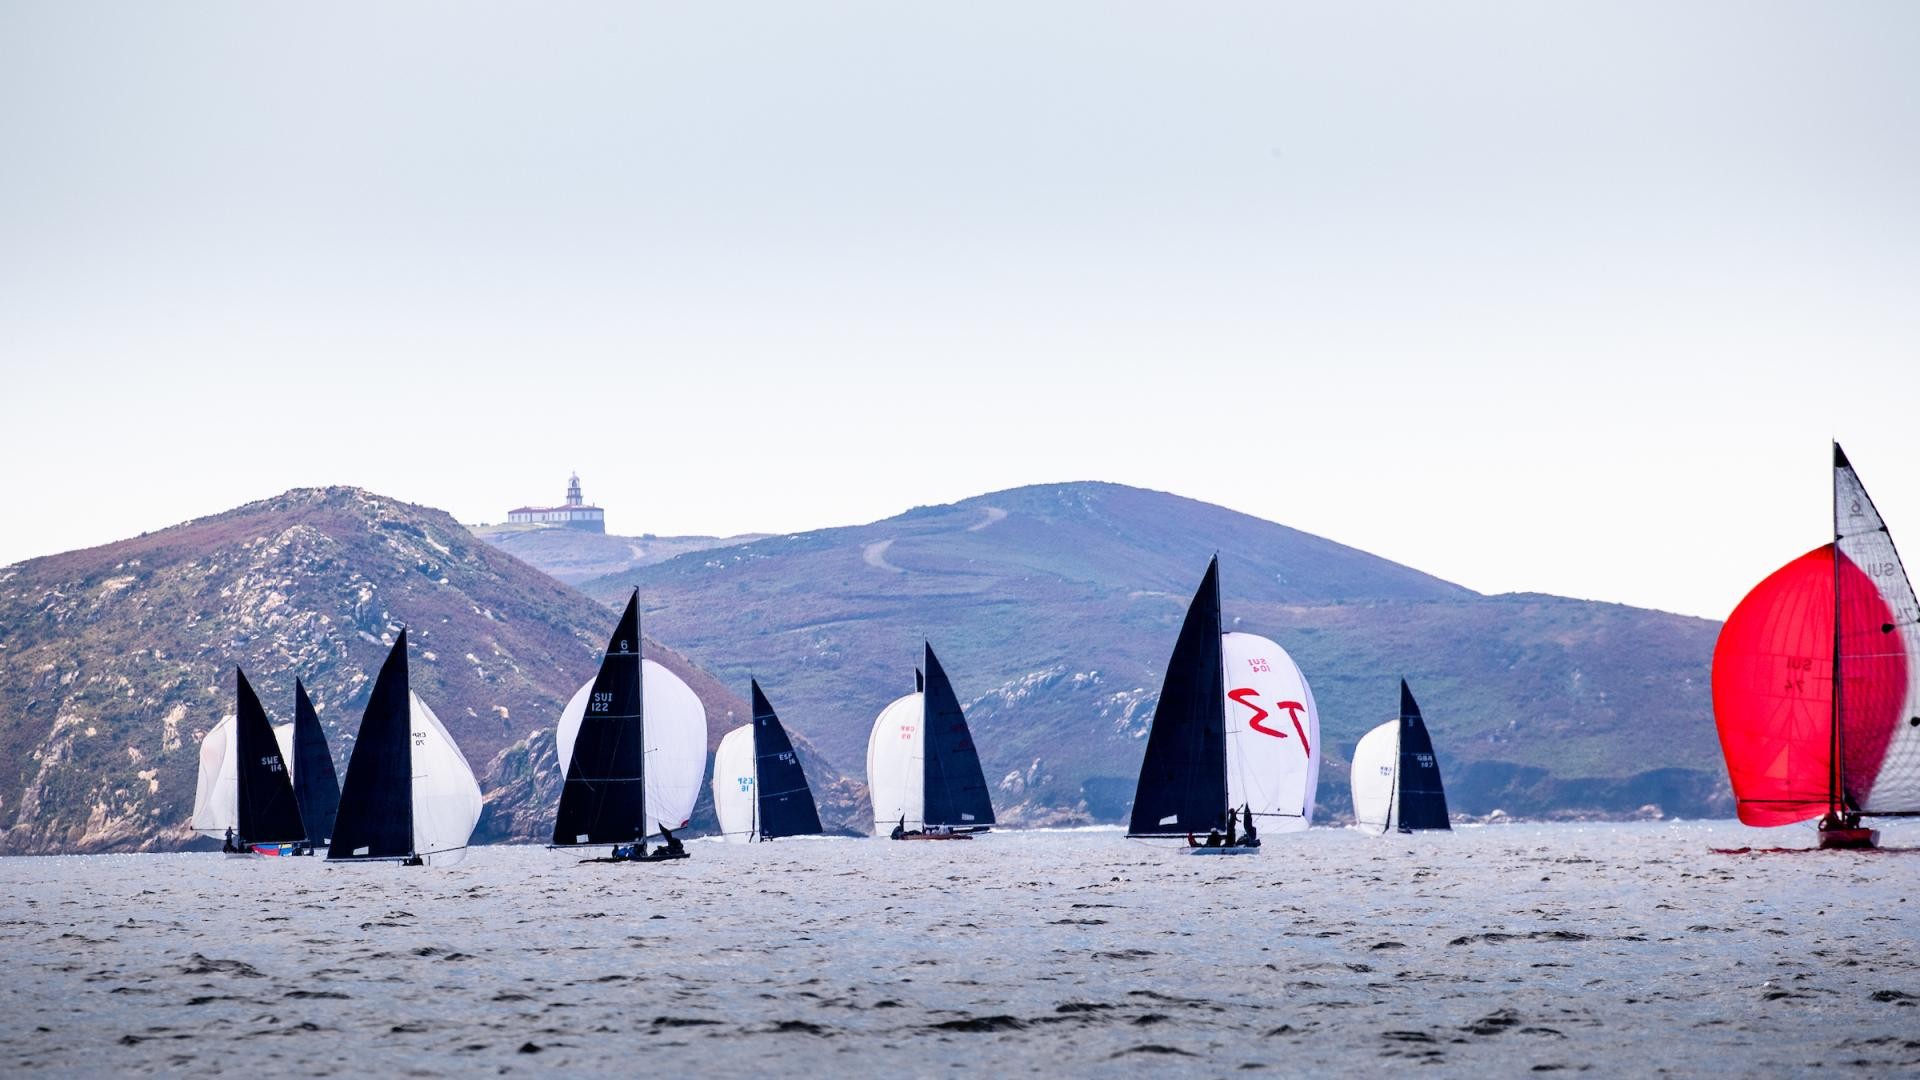 The Finns and the Swiss take control of the Xacobeo 6mR Europeans